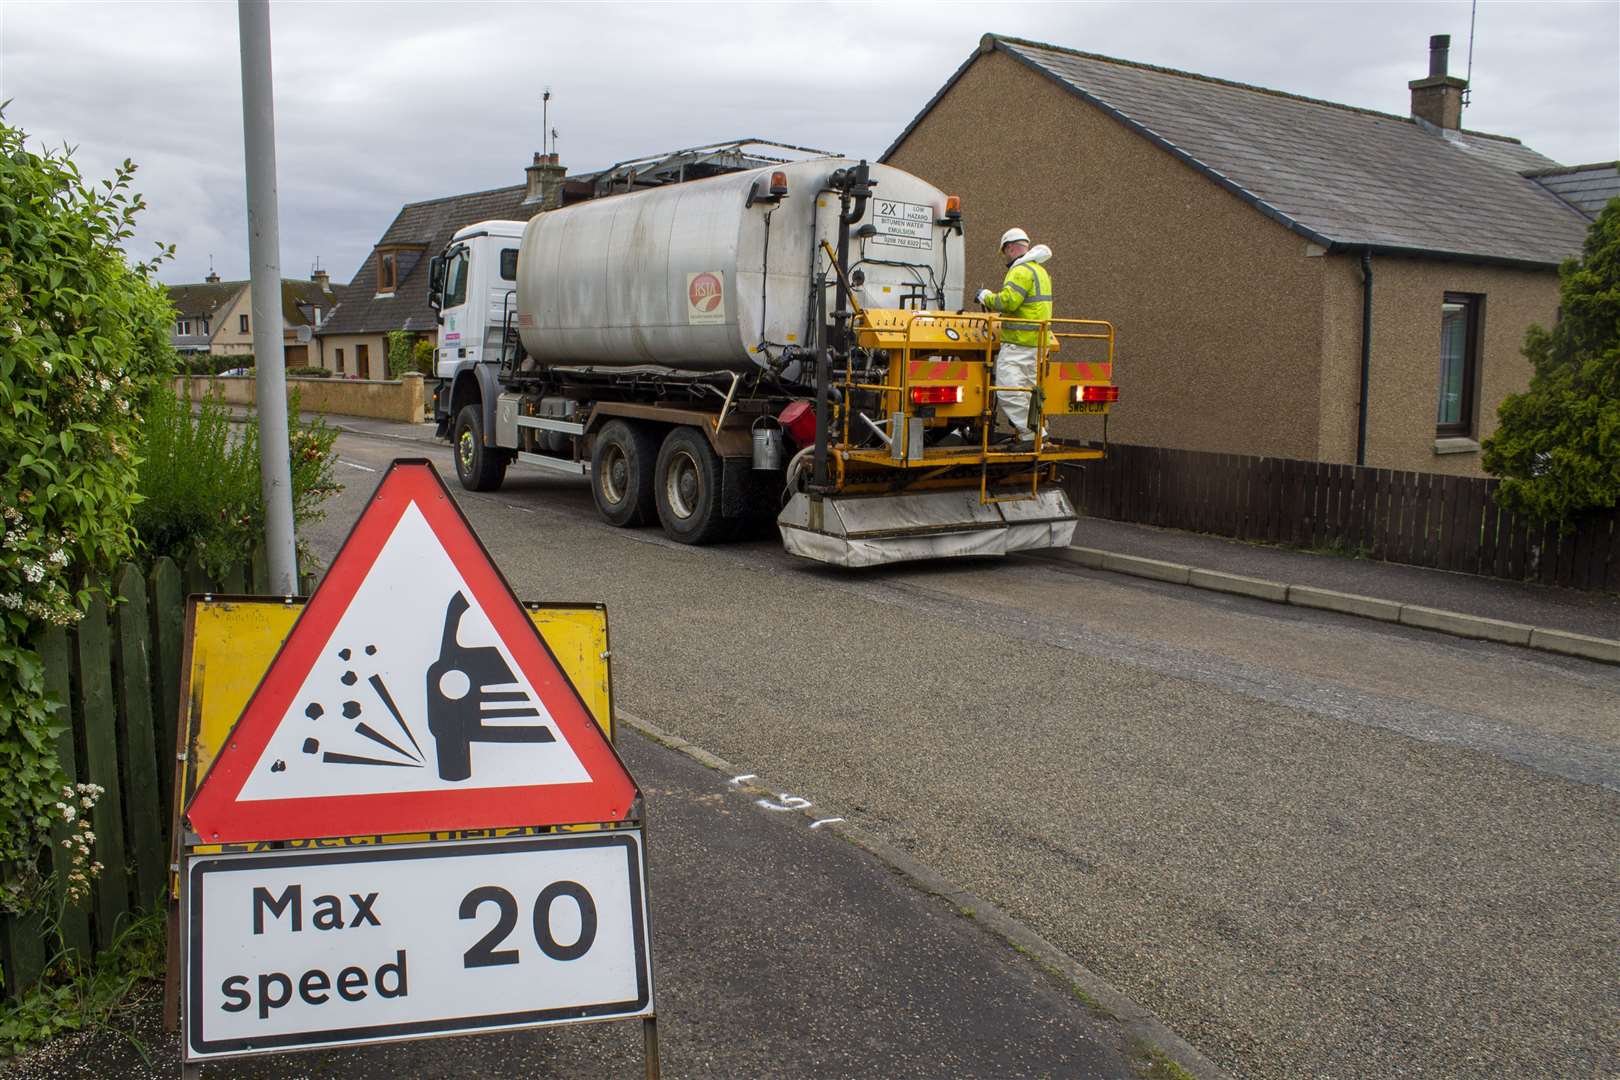 Drivers are being asked to watch their speed while surface dressing works are taking place.